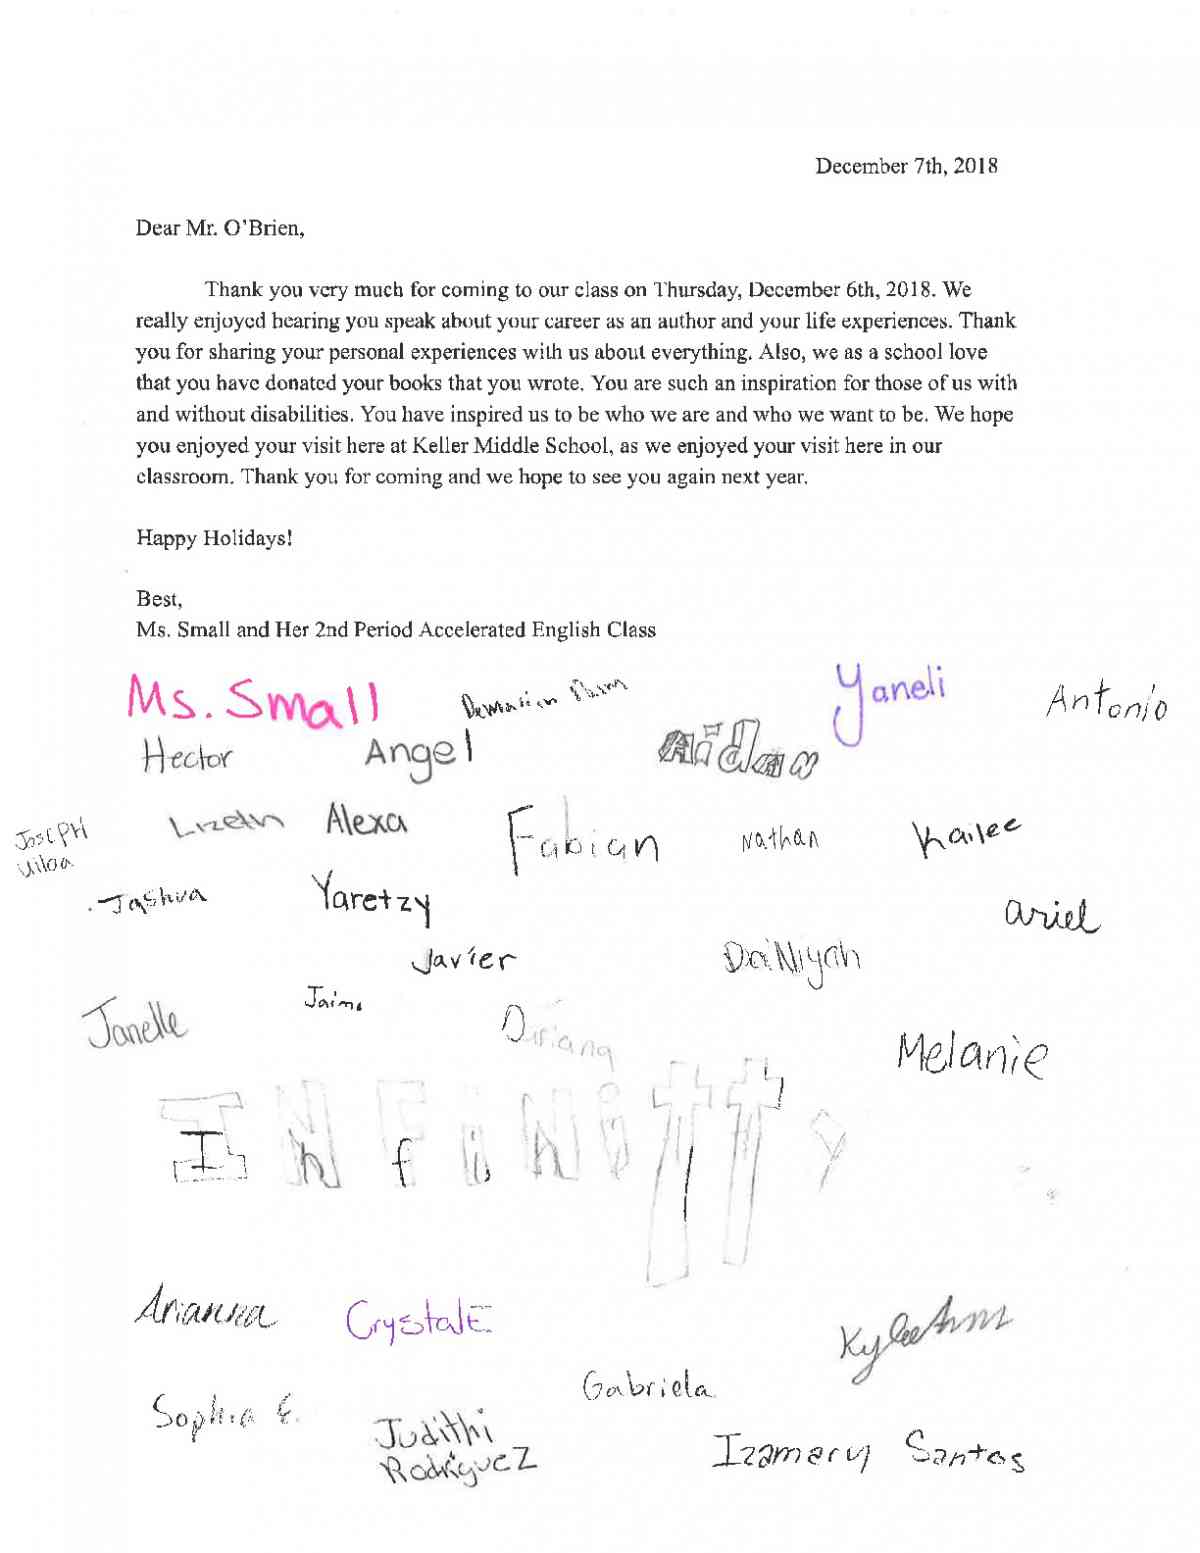 Marc-O'Brien-The-Final-Fence-Received-A-Thanks-Letter-from-A-School-austin-macauley-publishers